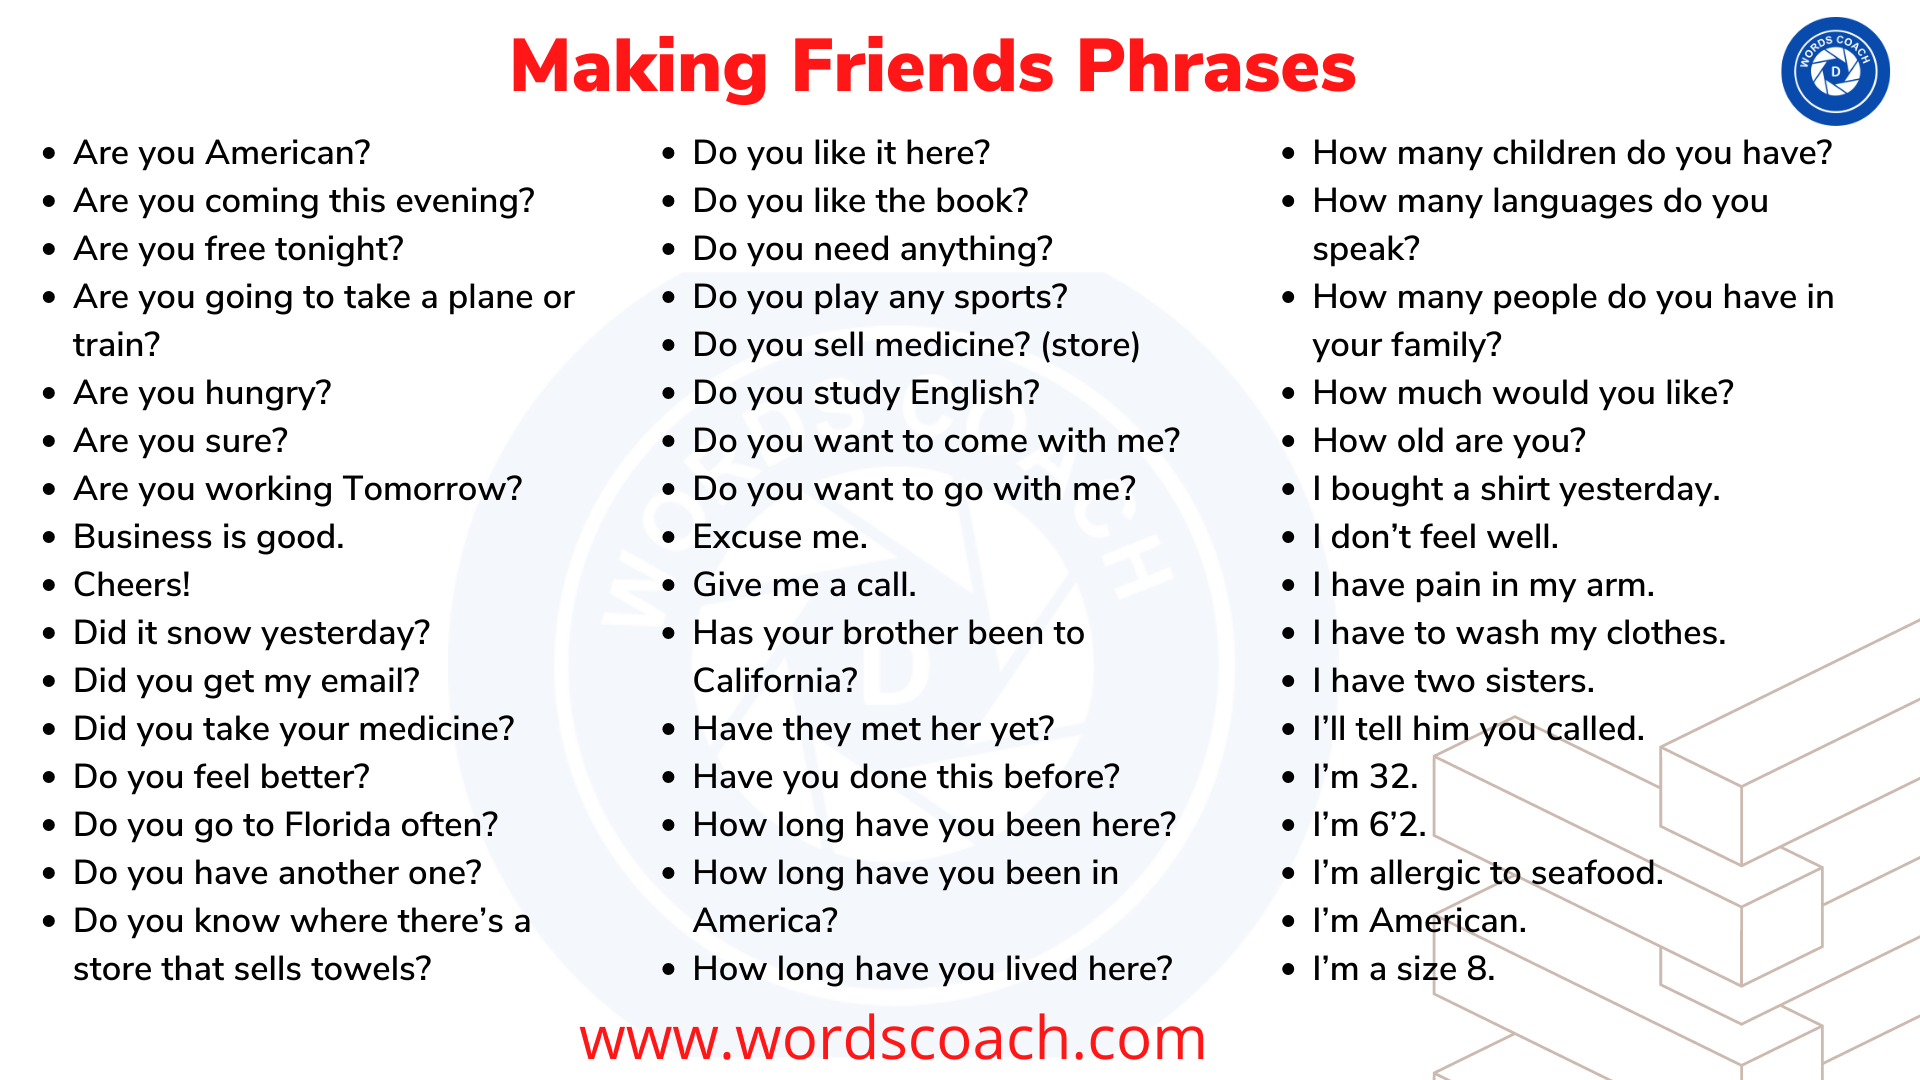 Making Friends Phrases